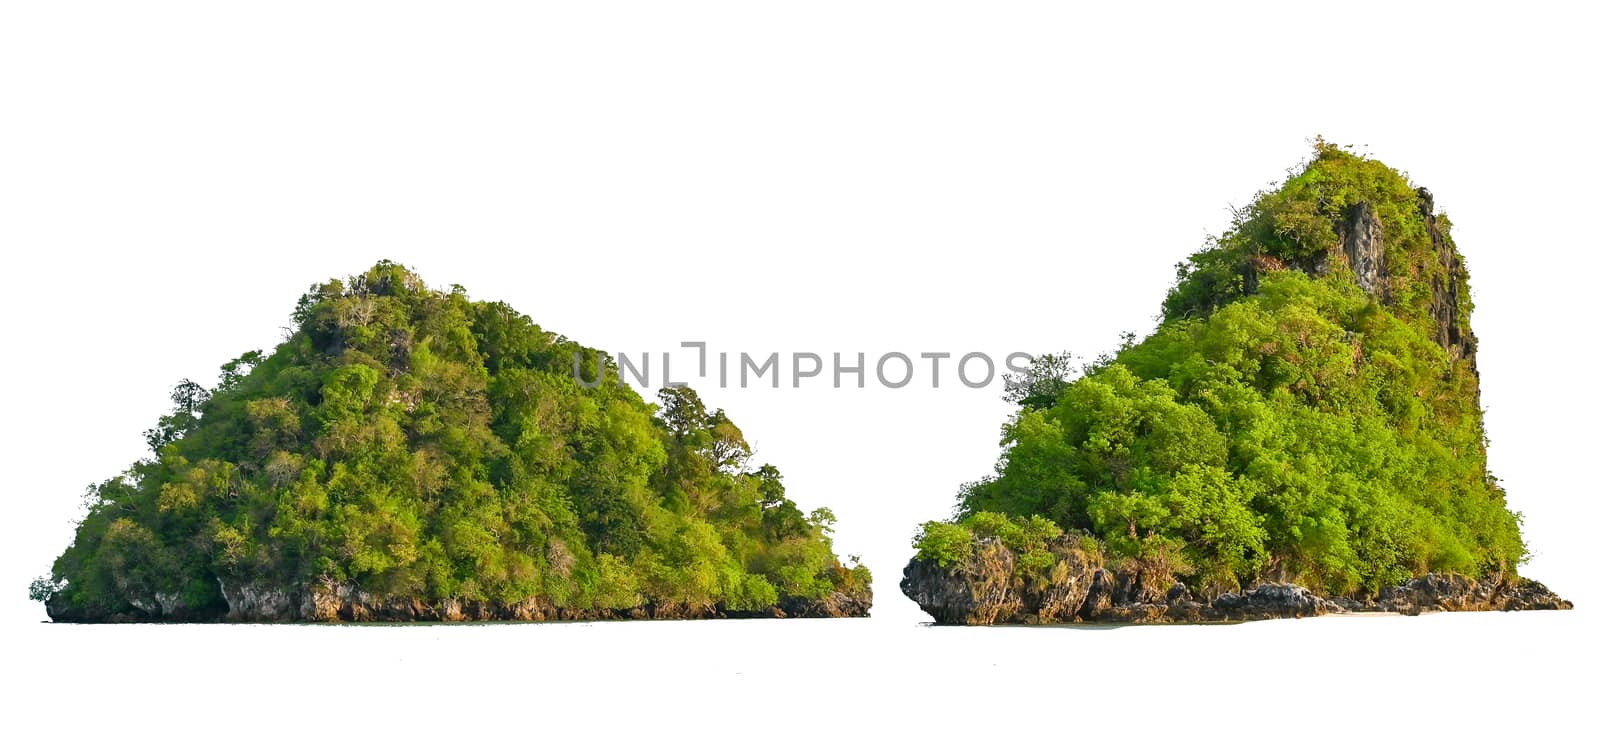 Isolate the island in the middle of the green sea white background separated from the background by sarayut_thaneerat